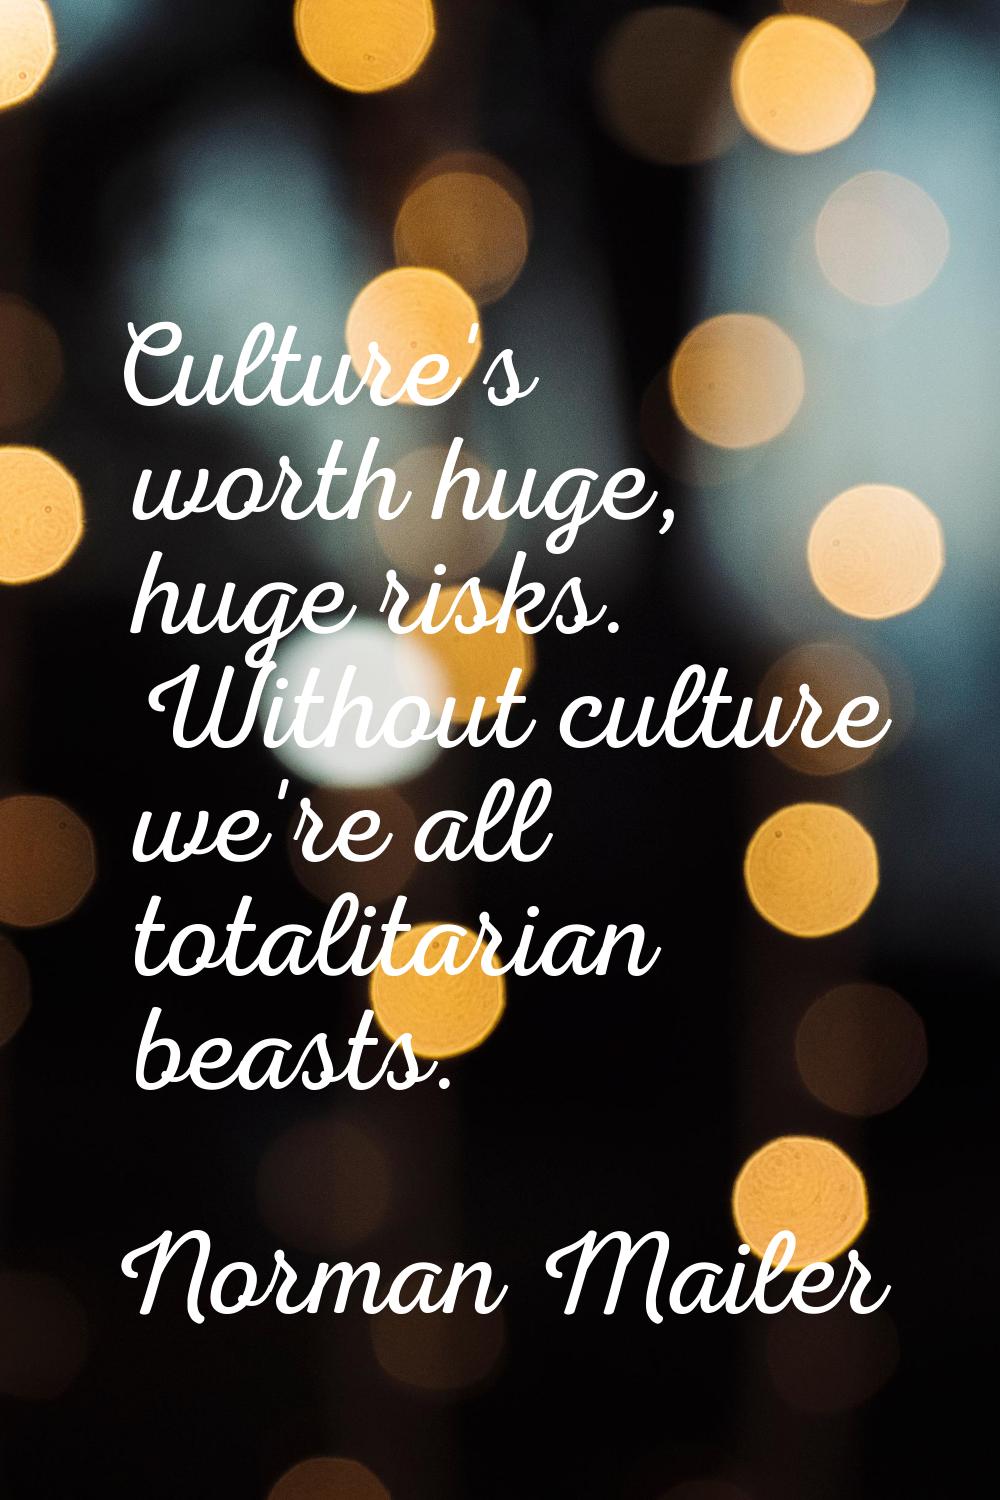 Culture's worth huge, huge risks. Without culture we're all totalitarian beasts.